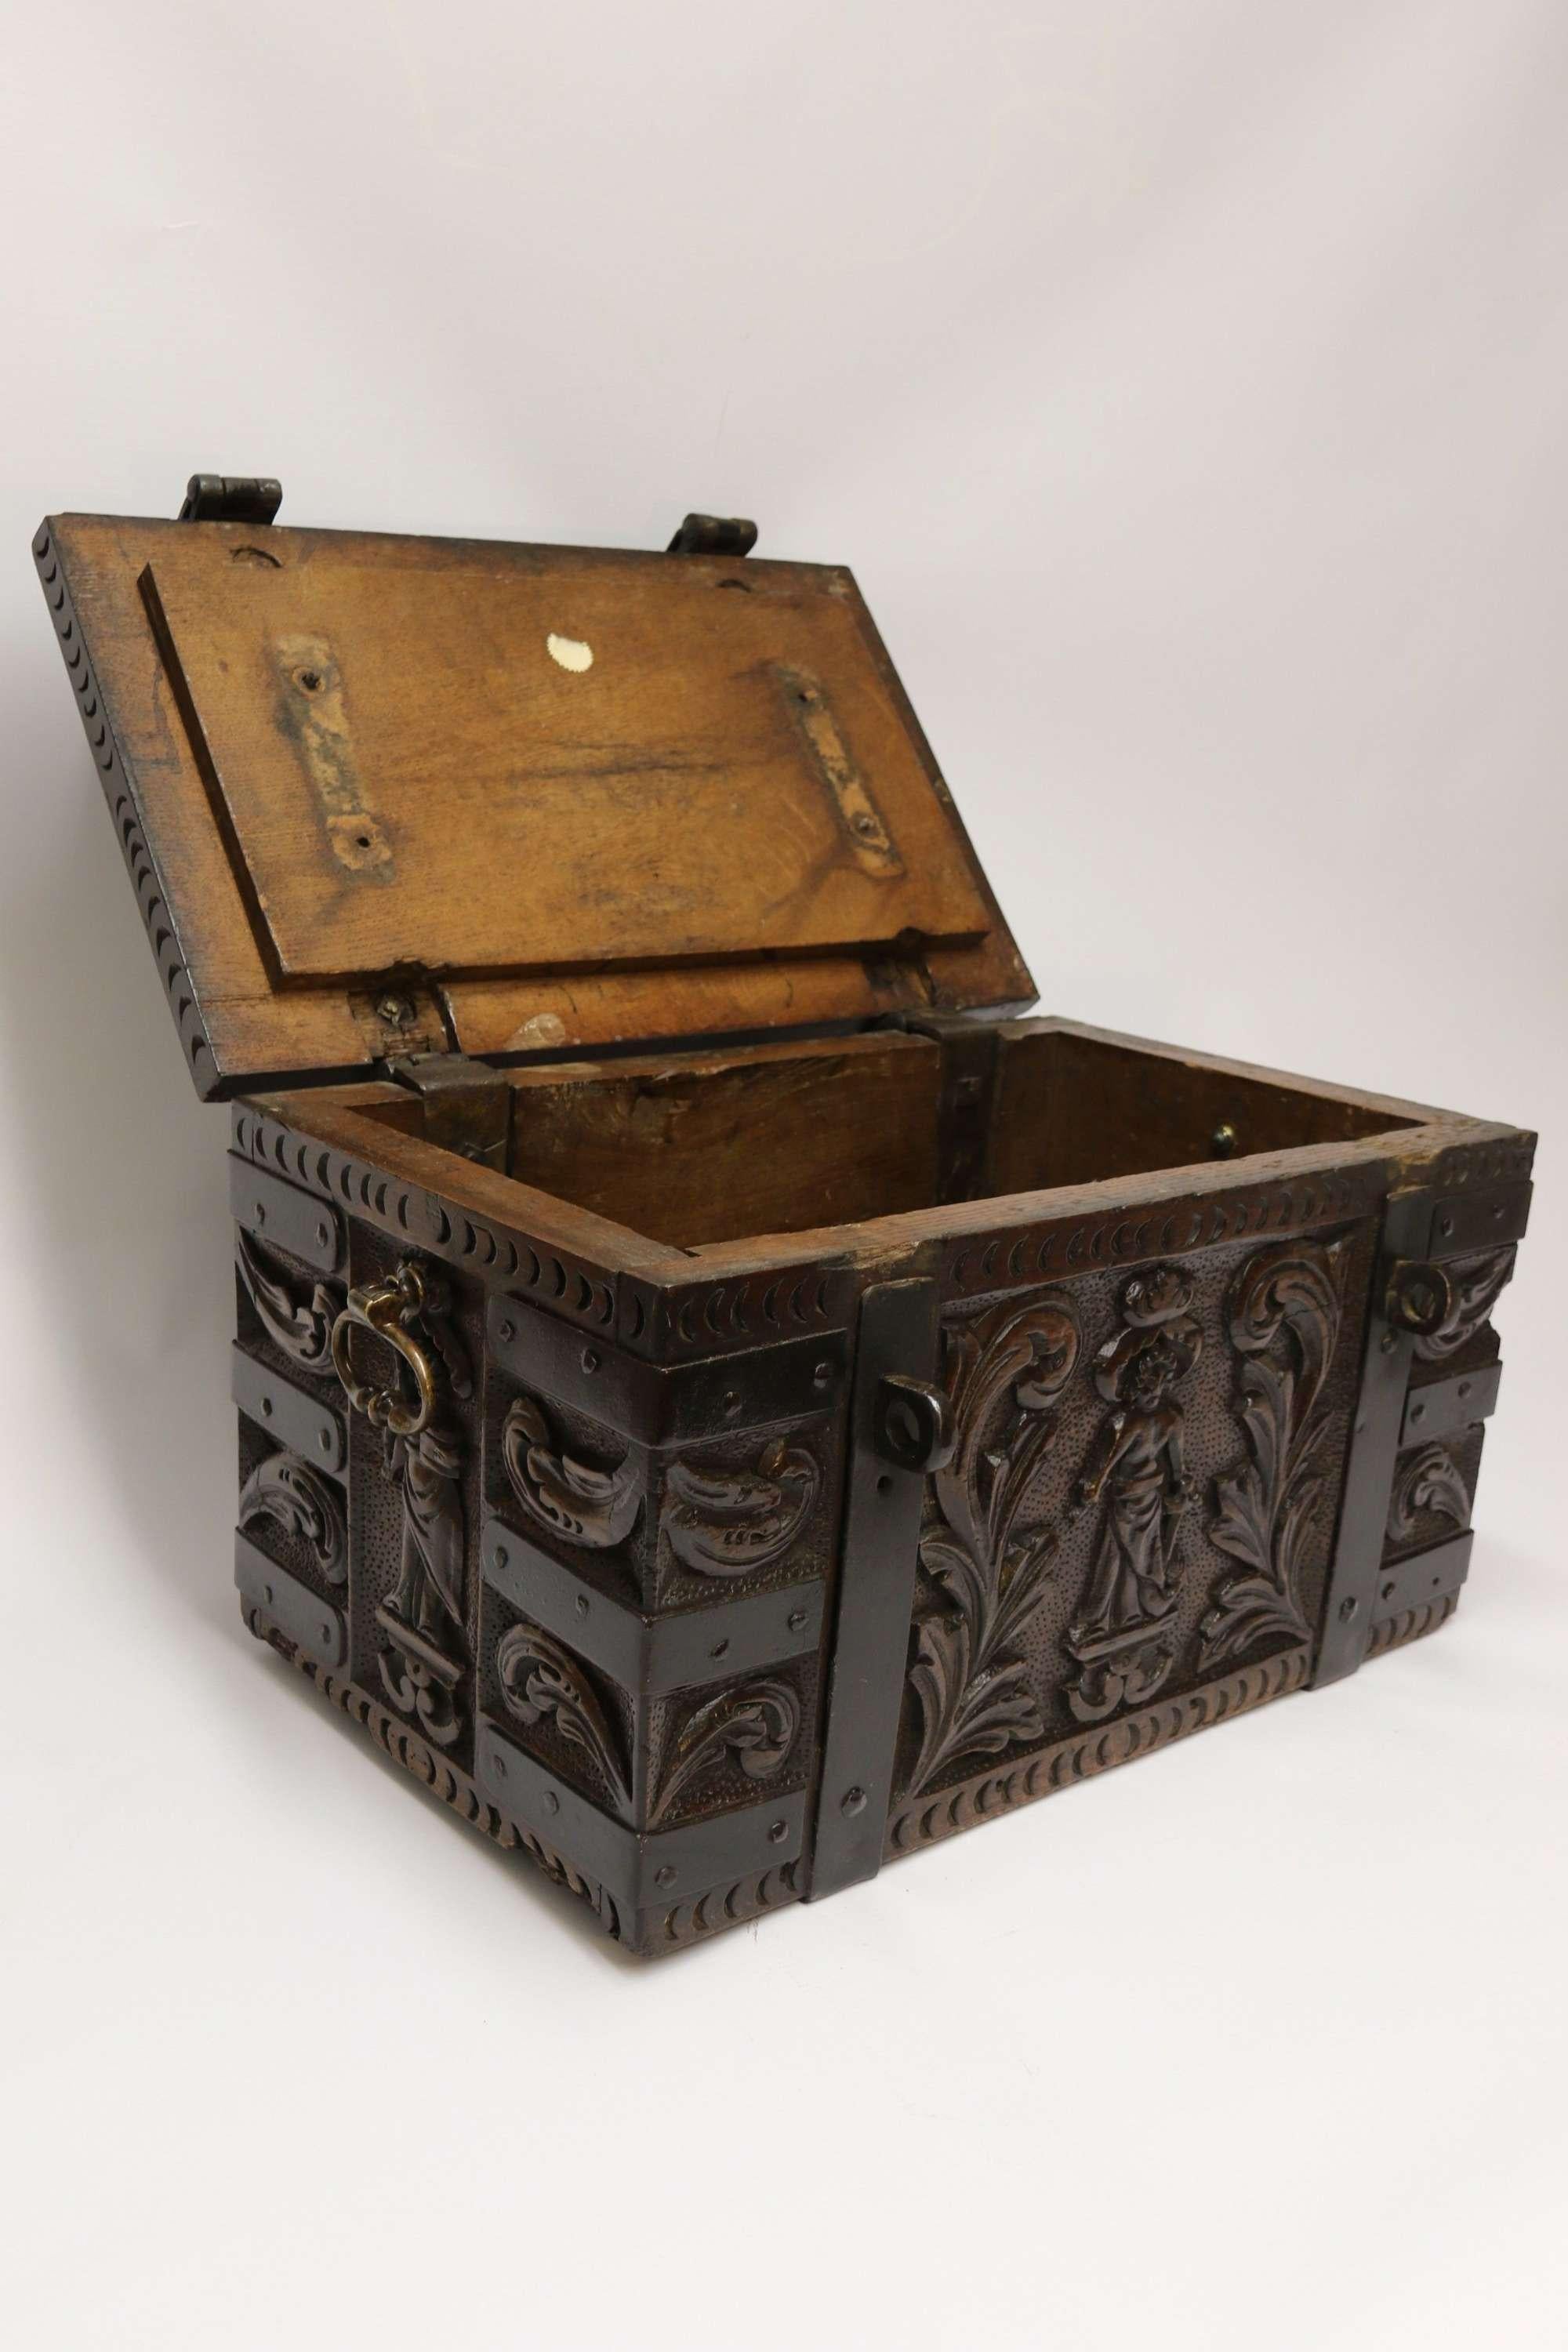 Late Victorian English ships or country house carved oak and steel bound strong box, circa 1840 For Sale